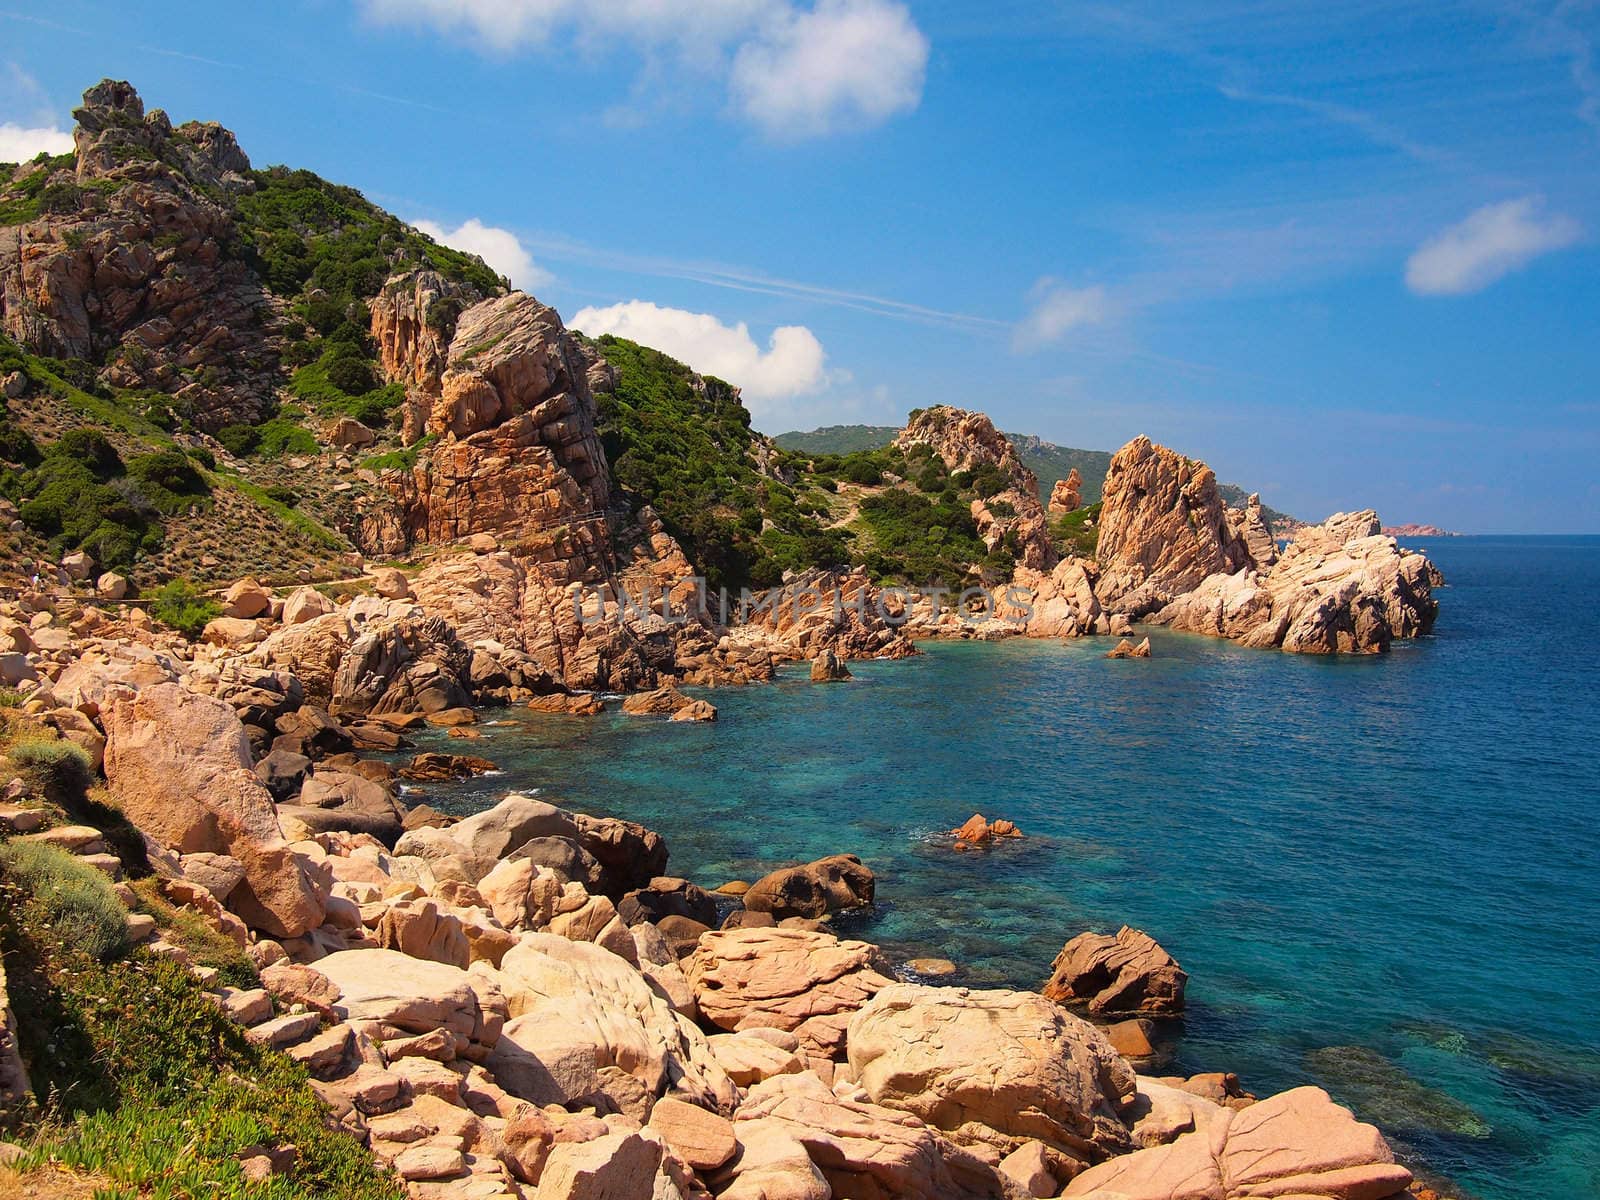 Typical clear water and red rocks of the coast of Sardinia, Italy.